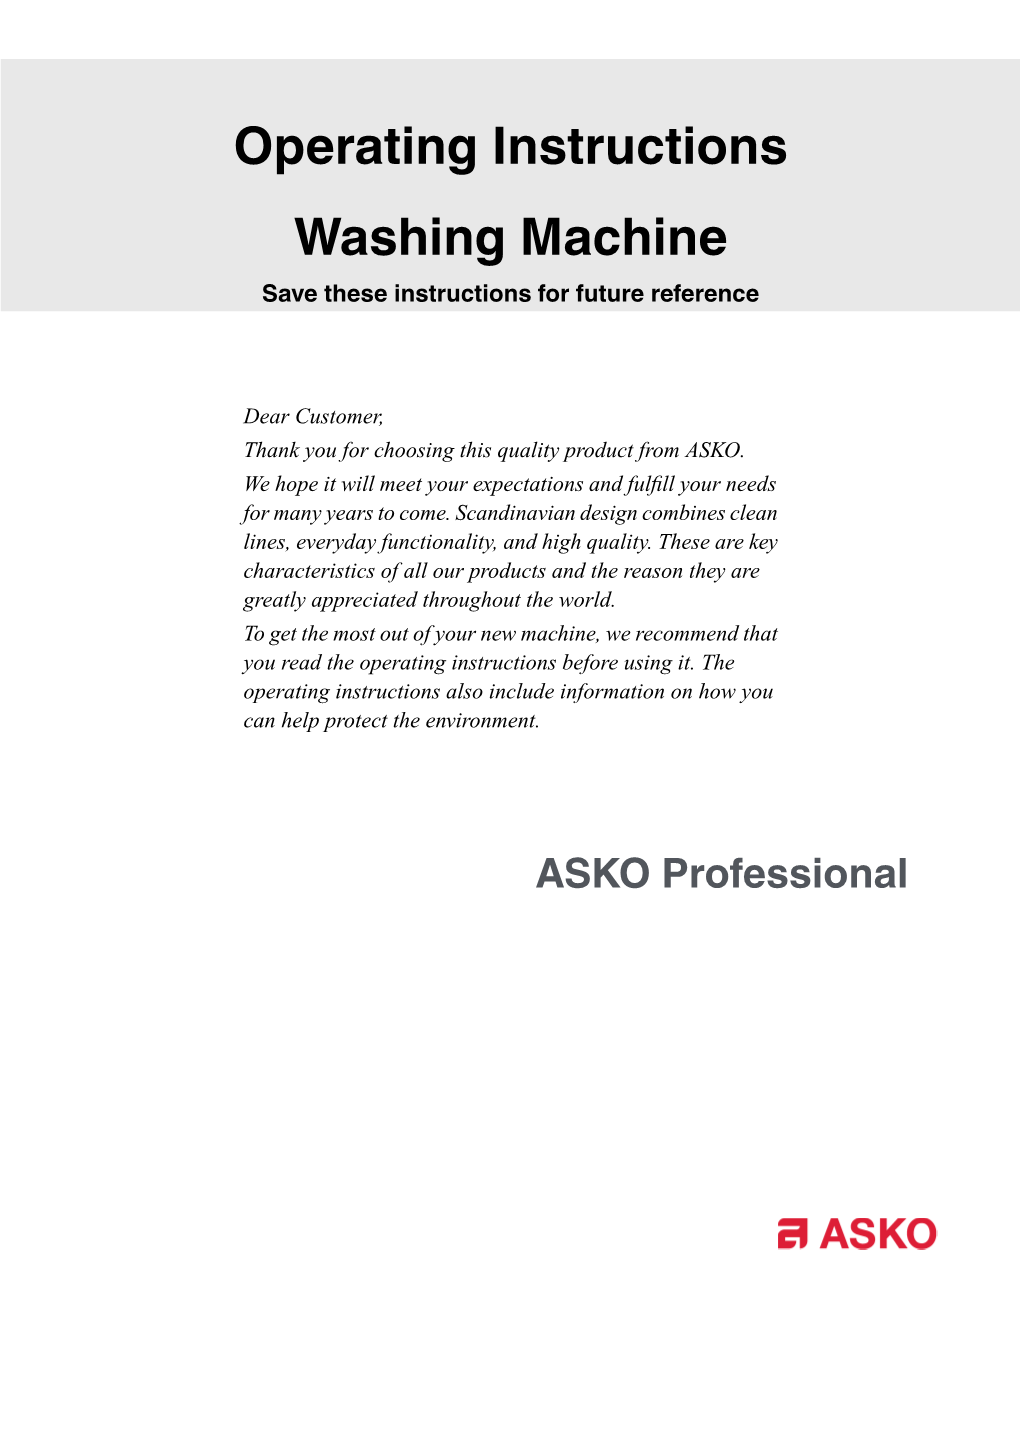 Operating Instructions Washing Machine Save These Instructions for Future Reference